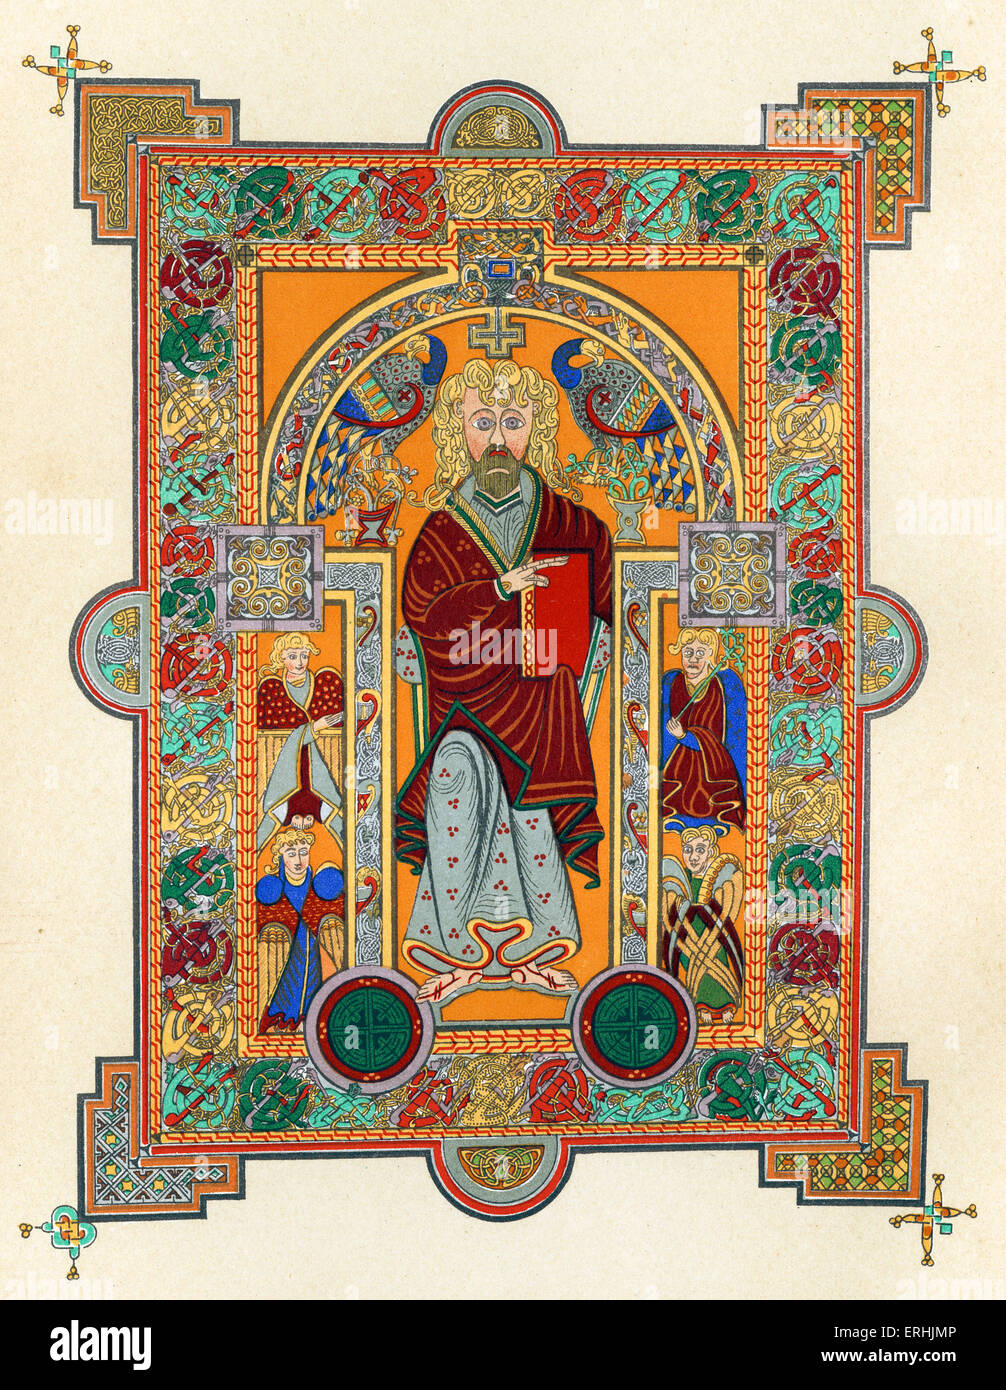 Saint Matthew. From the Book of Kells, A.D. 650-690. An ornately illustrated manuscript produced by Celtic monks around AD 800 Stock Photo